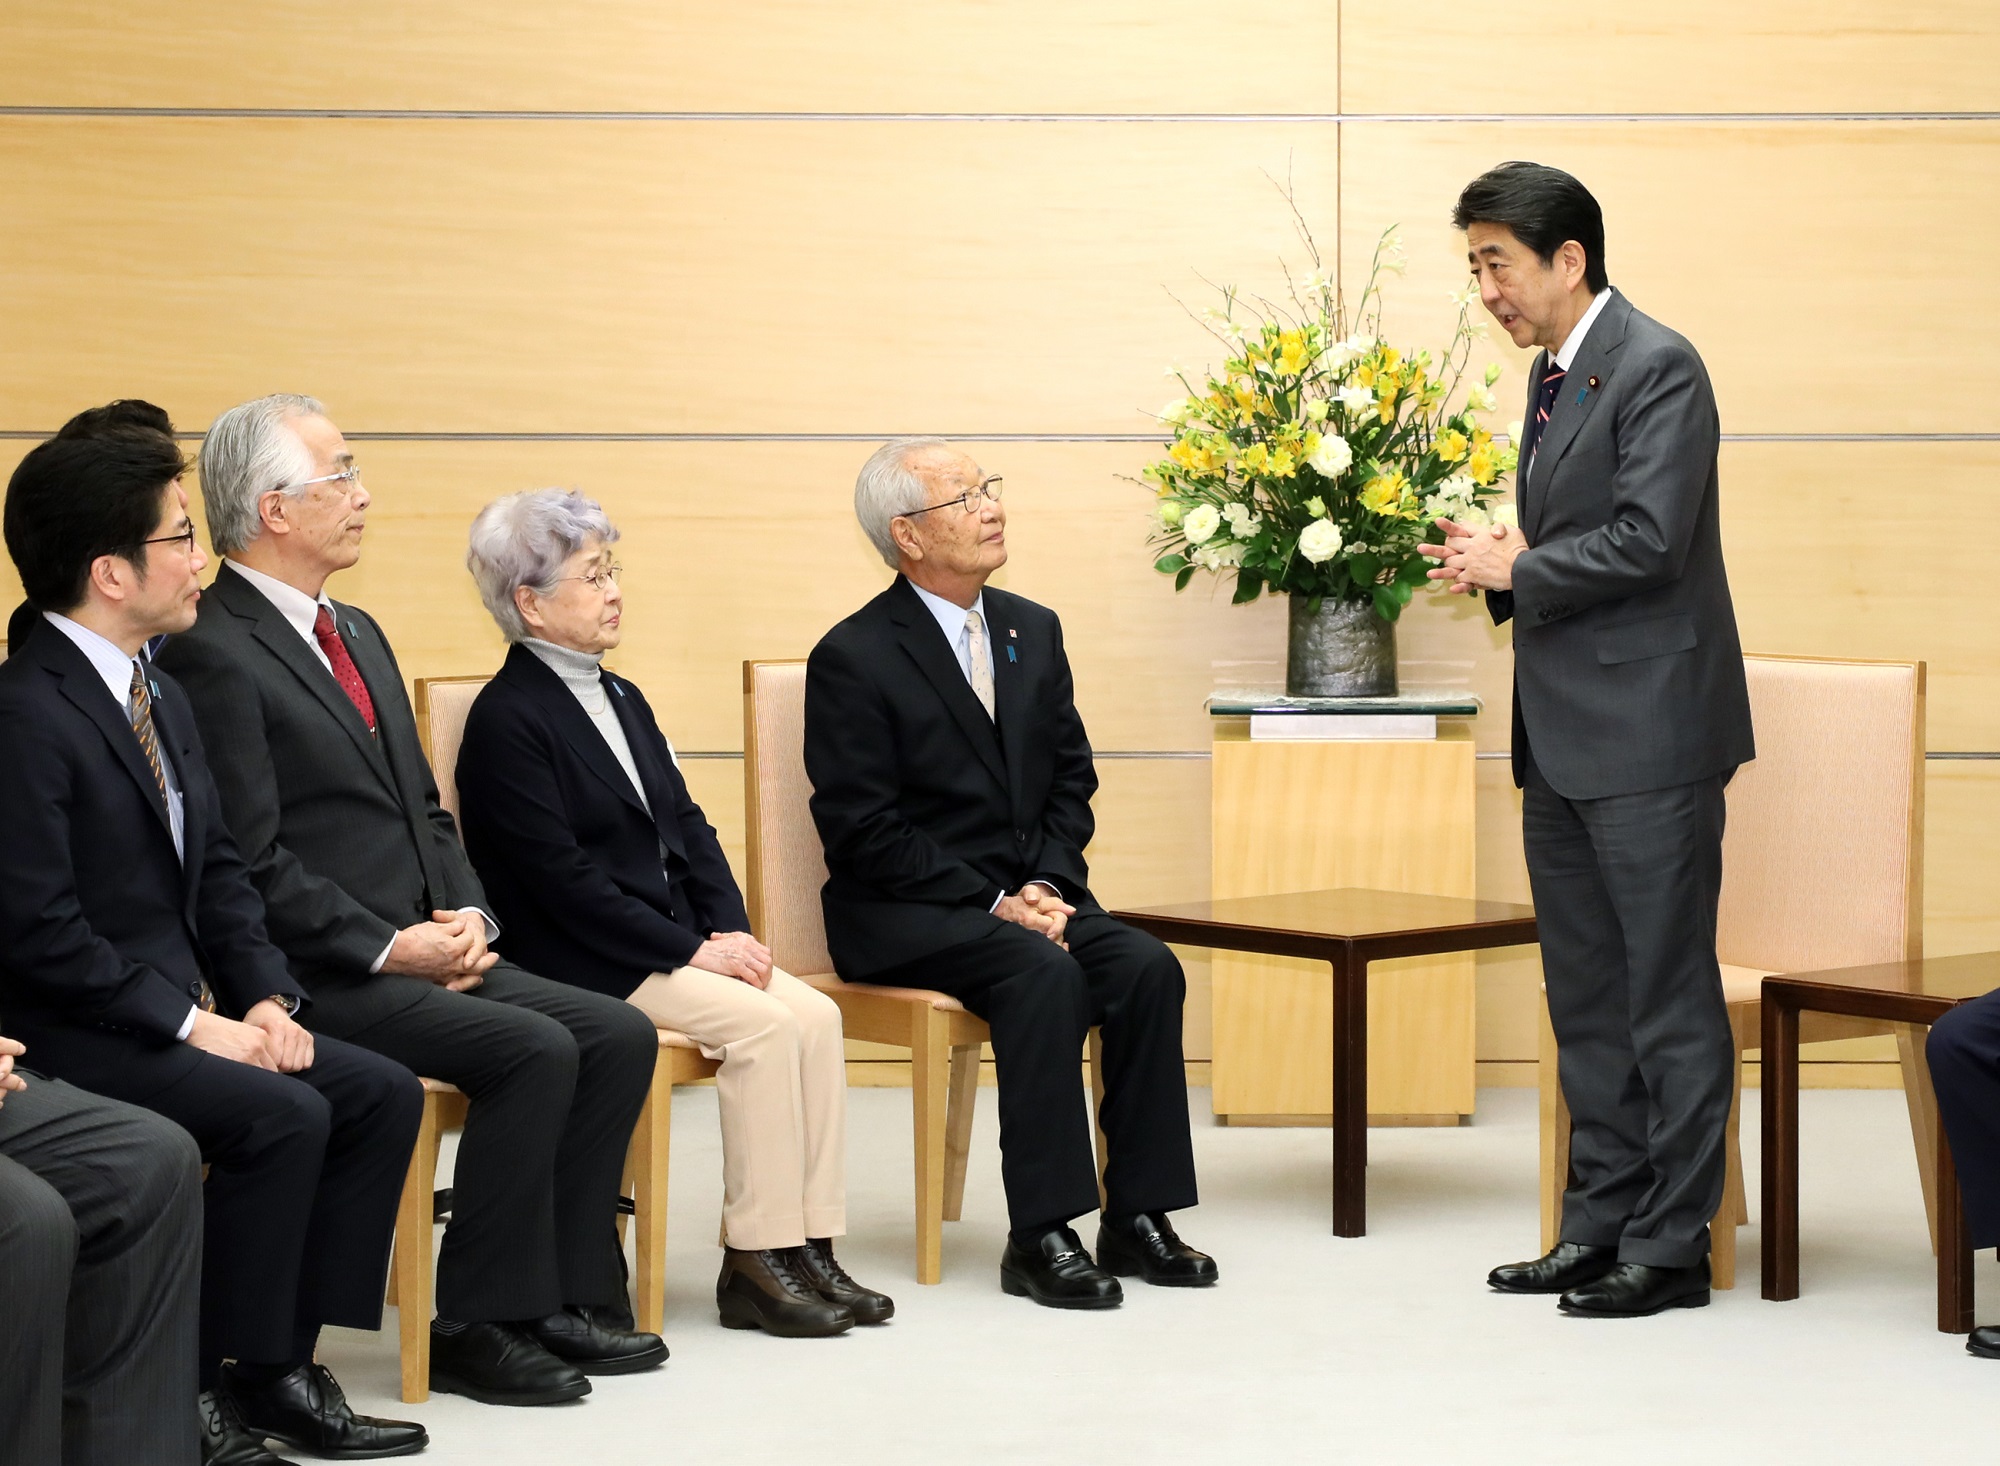 Photograph of the Prime Minister holding the meeting